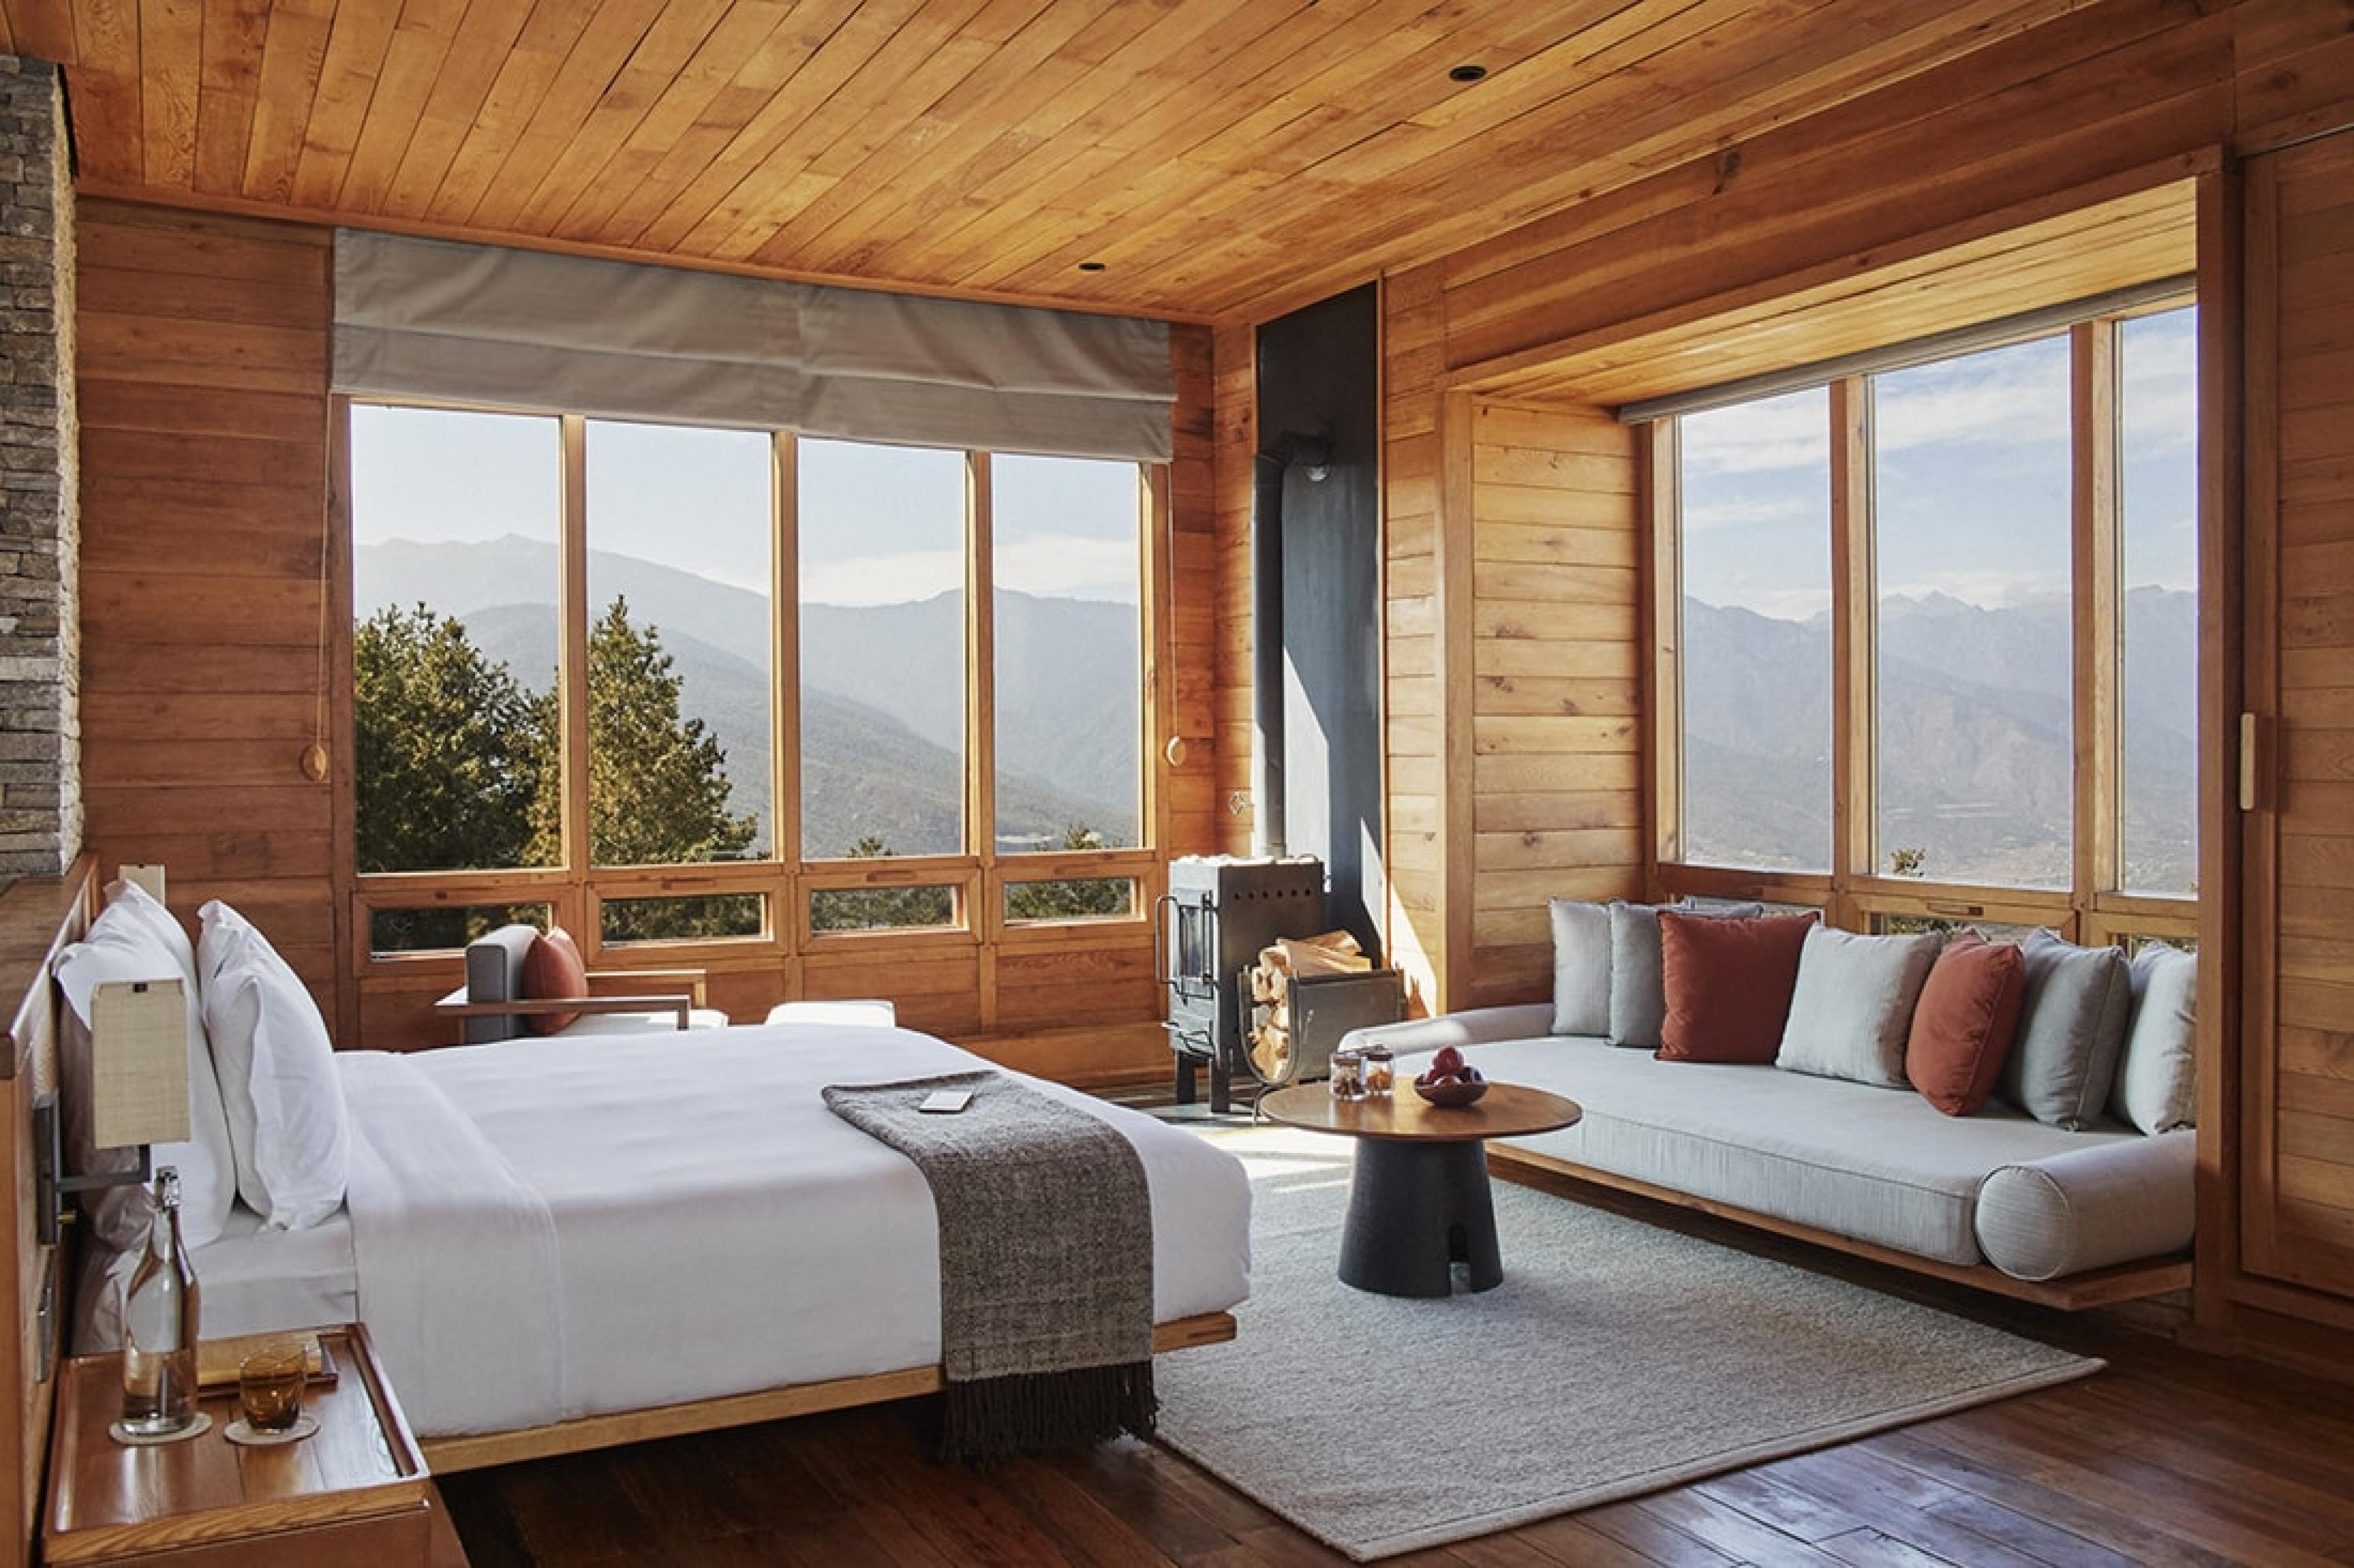 a bed and couch in a hotel suite with views over bhutan valley landscape